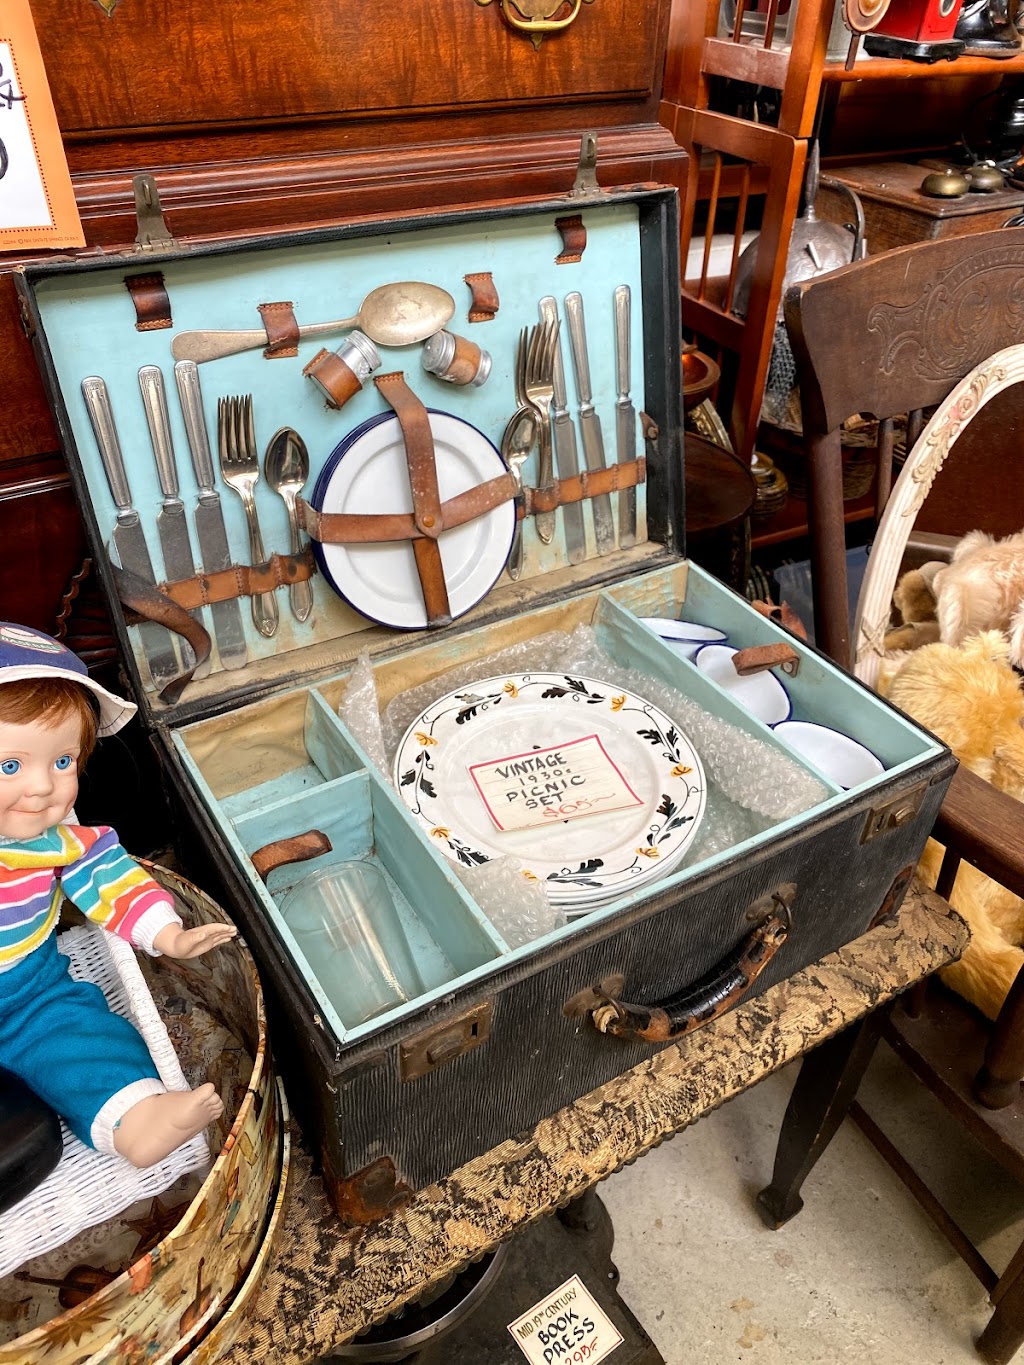 The Greenhouse Antiques And Collectibles | 425 N Country Rd, St James, NY 11780 | Phone: (631) 584-3758